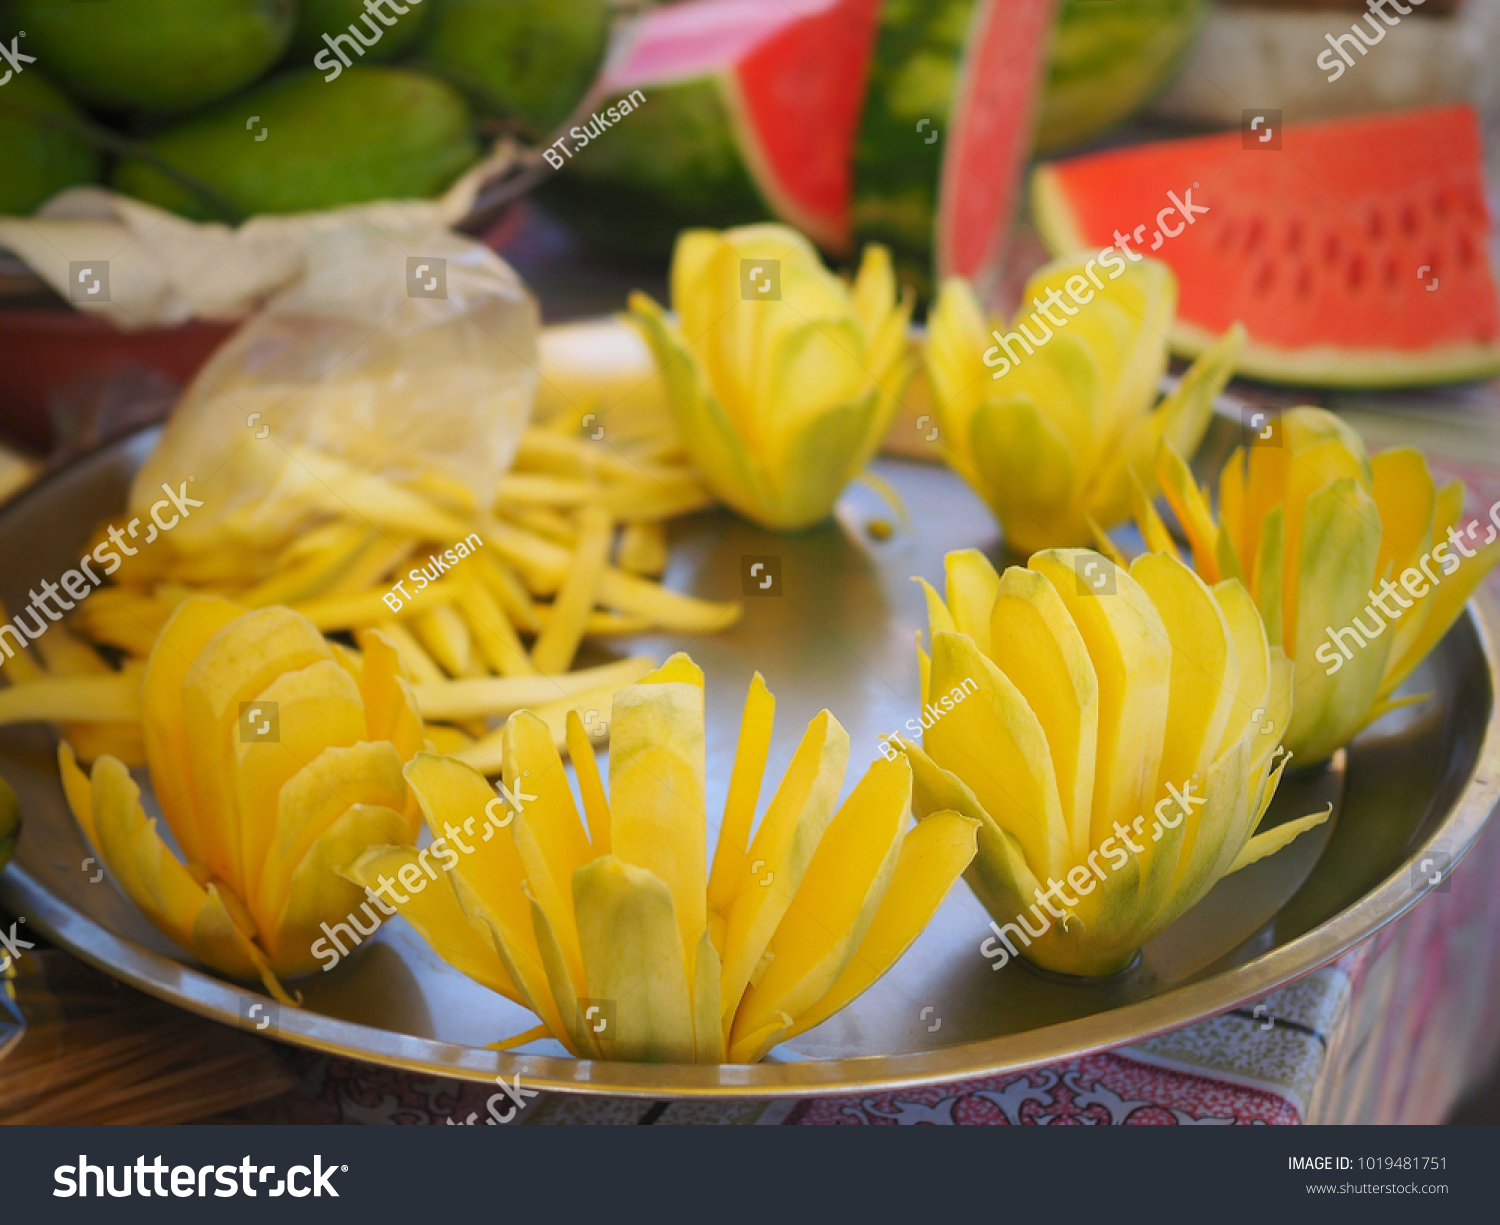 Download Many Yellow Mangoes Sliced On Tray Stock Photo Edit Now 1019481751 PSD Mockup Templates